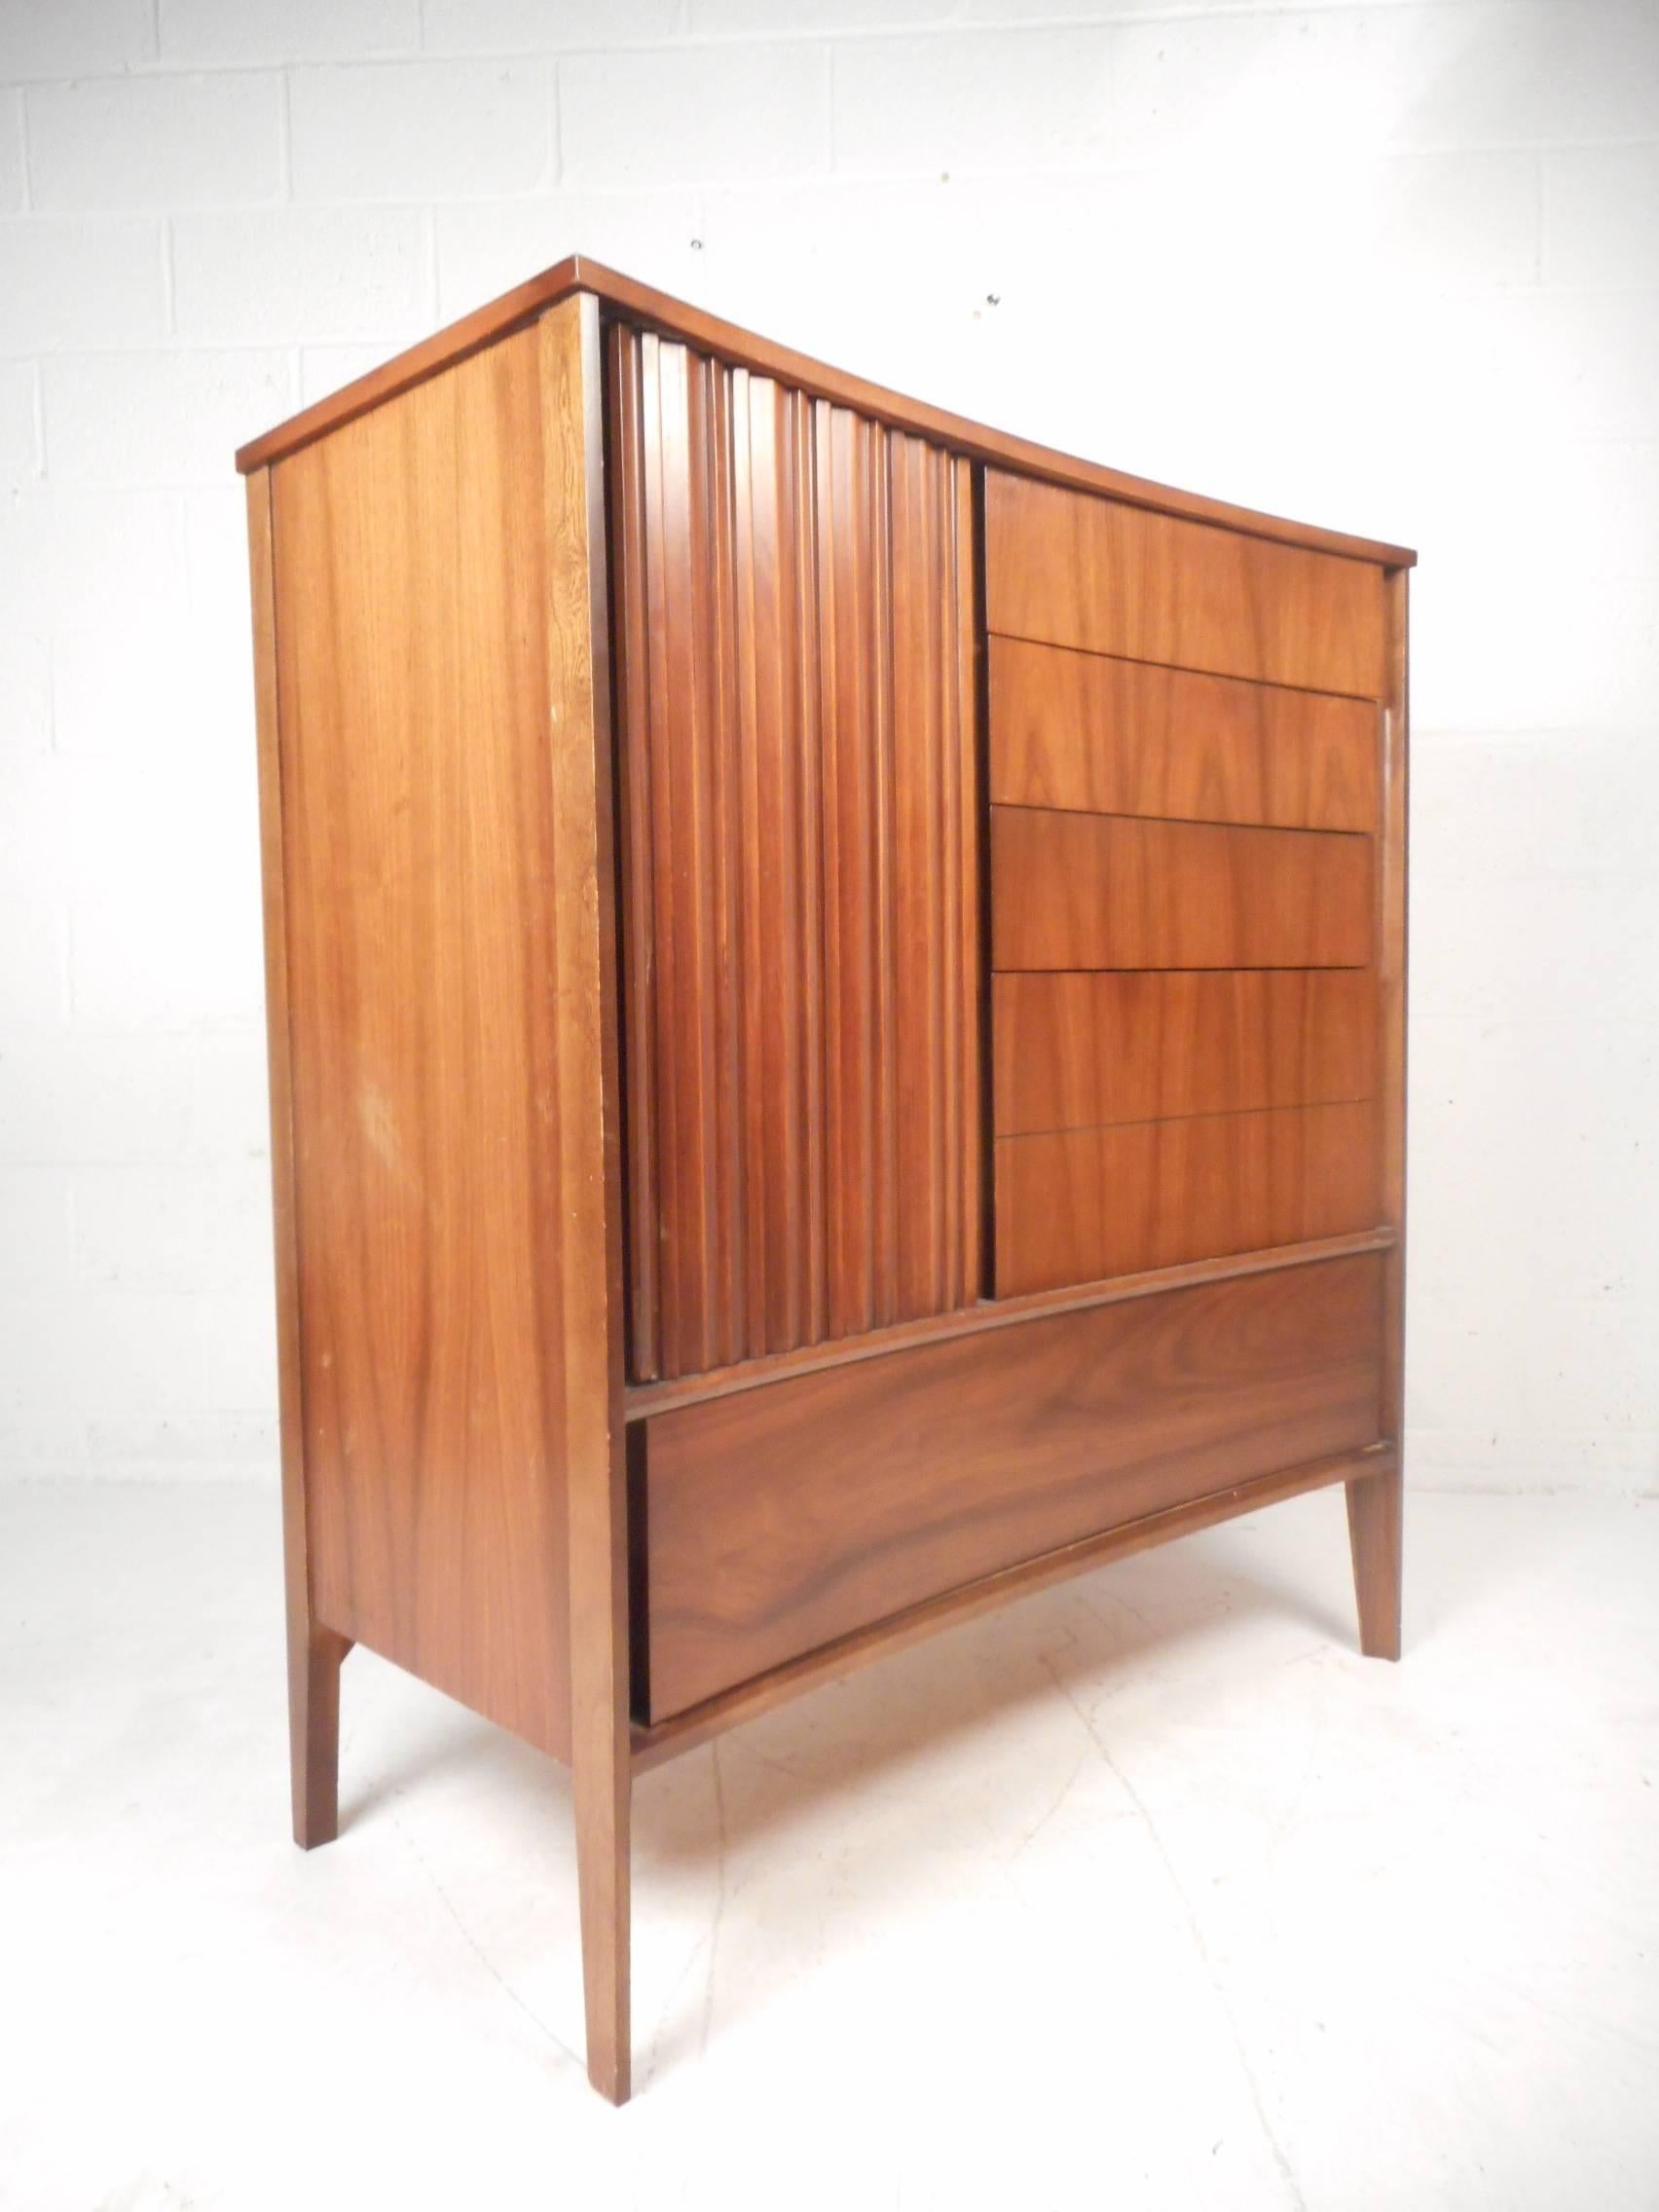 This beautiful vintage modern bedroom set includes a low dresser, a highboy, and two night stands. Sleek design features a subtle bow shaped front with lovely dark walnut wood grain. Quality craftsmanship with many wide and deep drawers offering